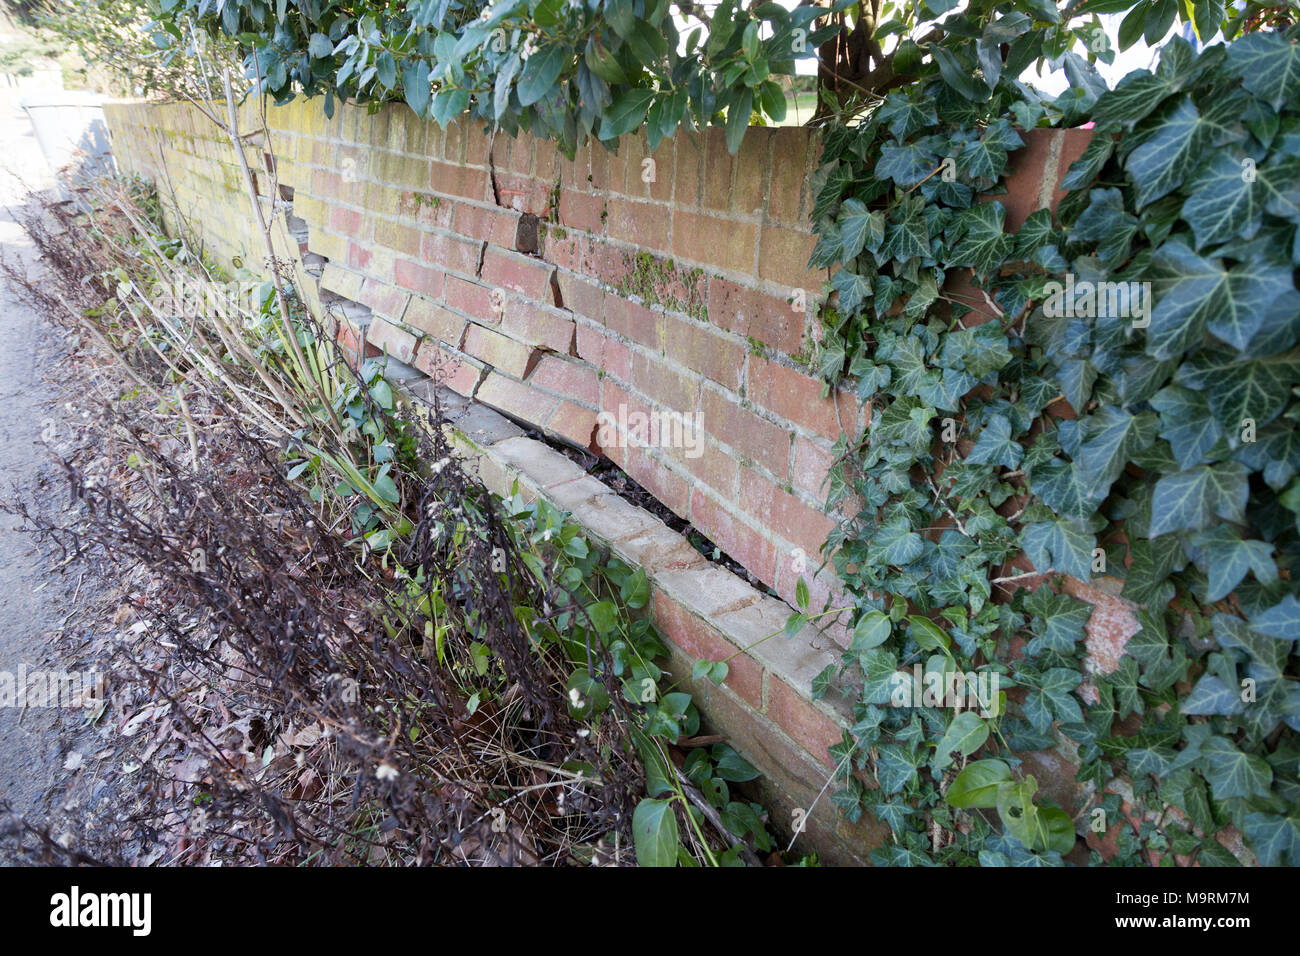 Impact damage to red brick garden wall caused by vehicle reversing, Suffolk, England, UK Stock Photo